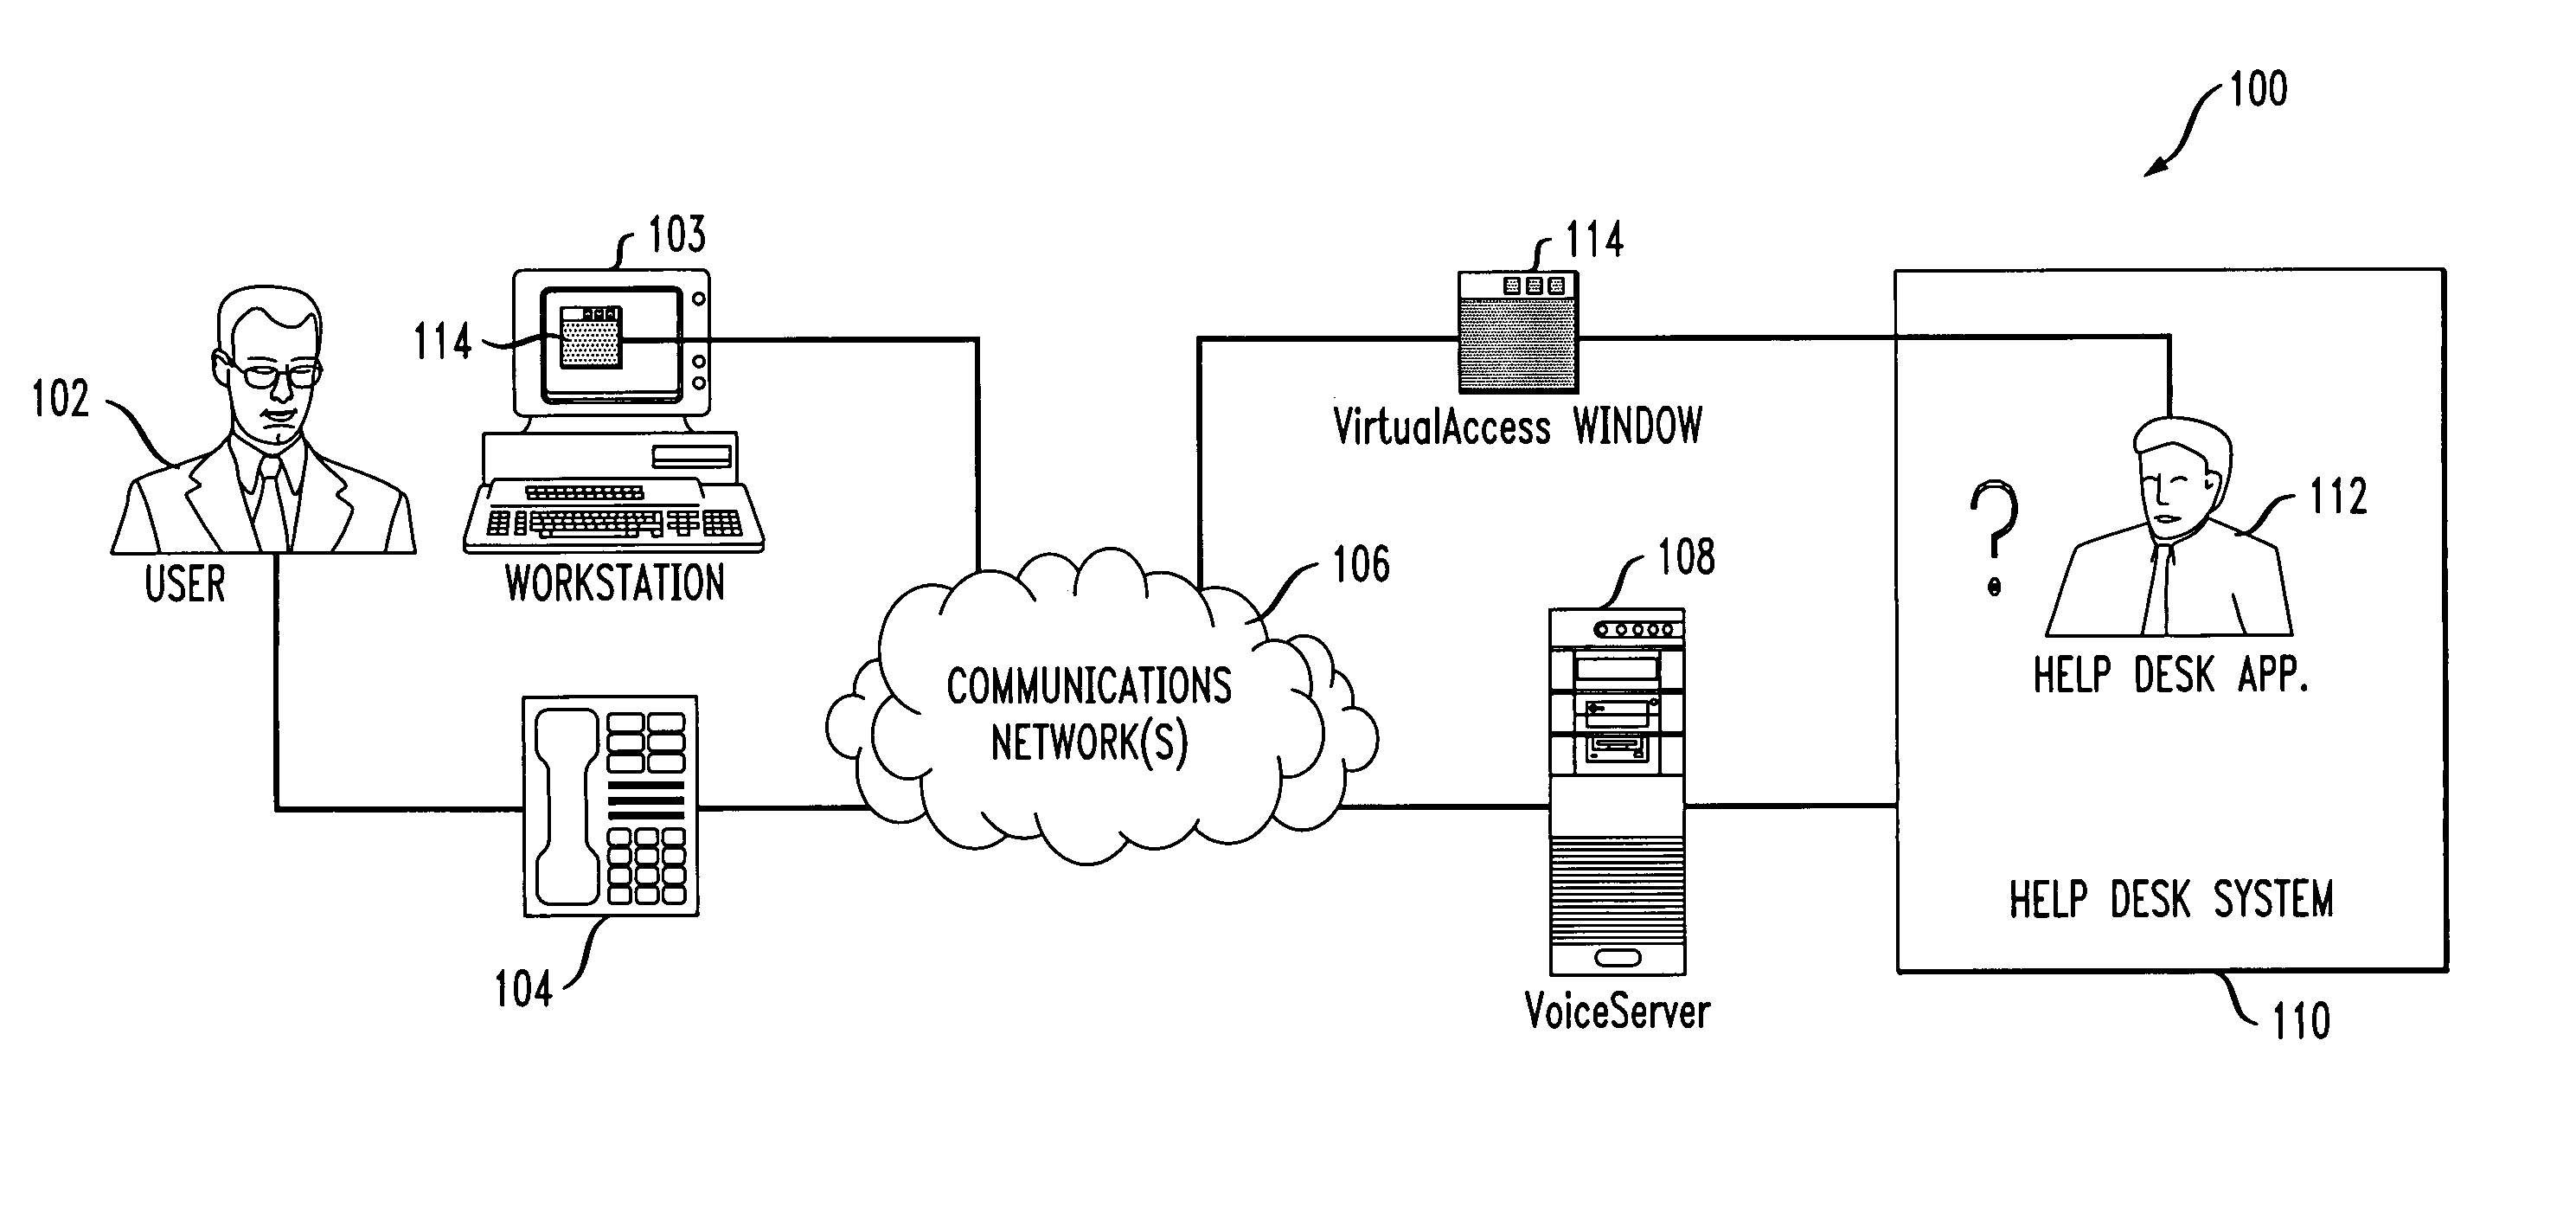 Apparatus and method for addressing computer-related problems